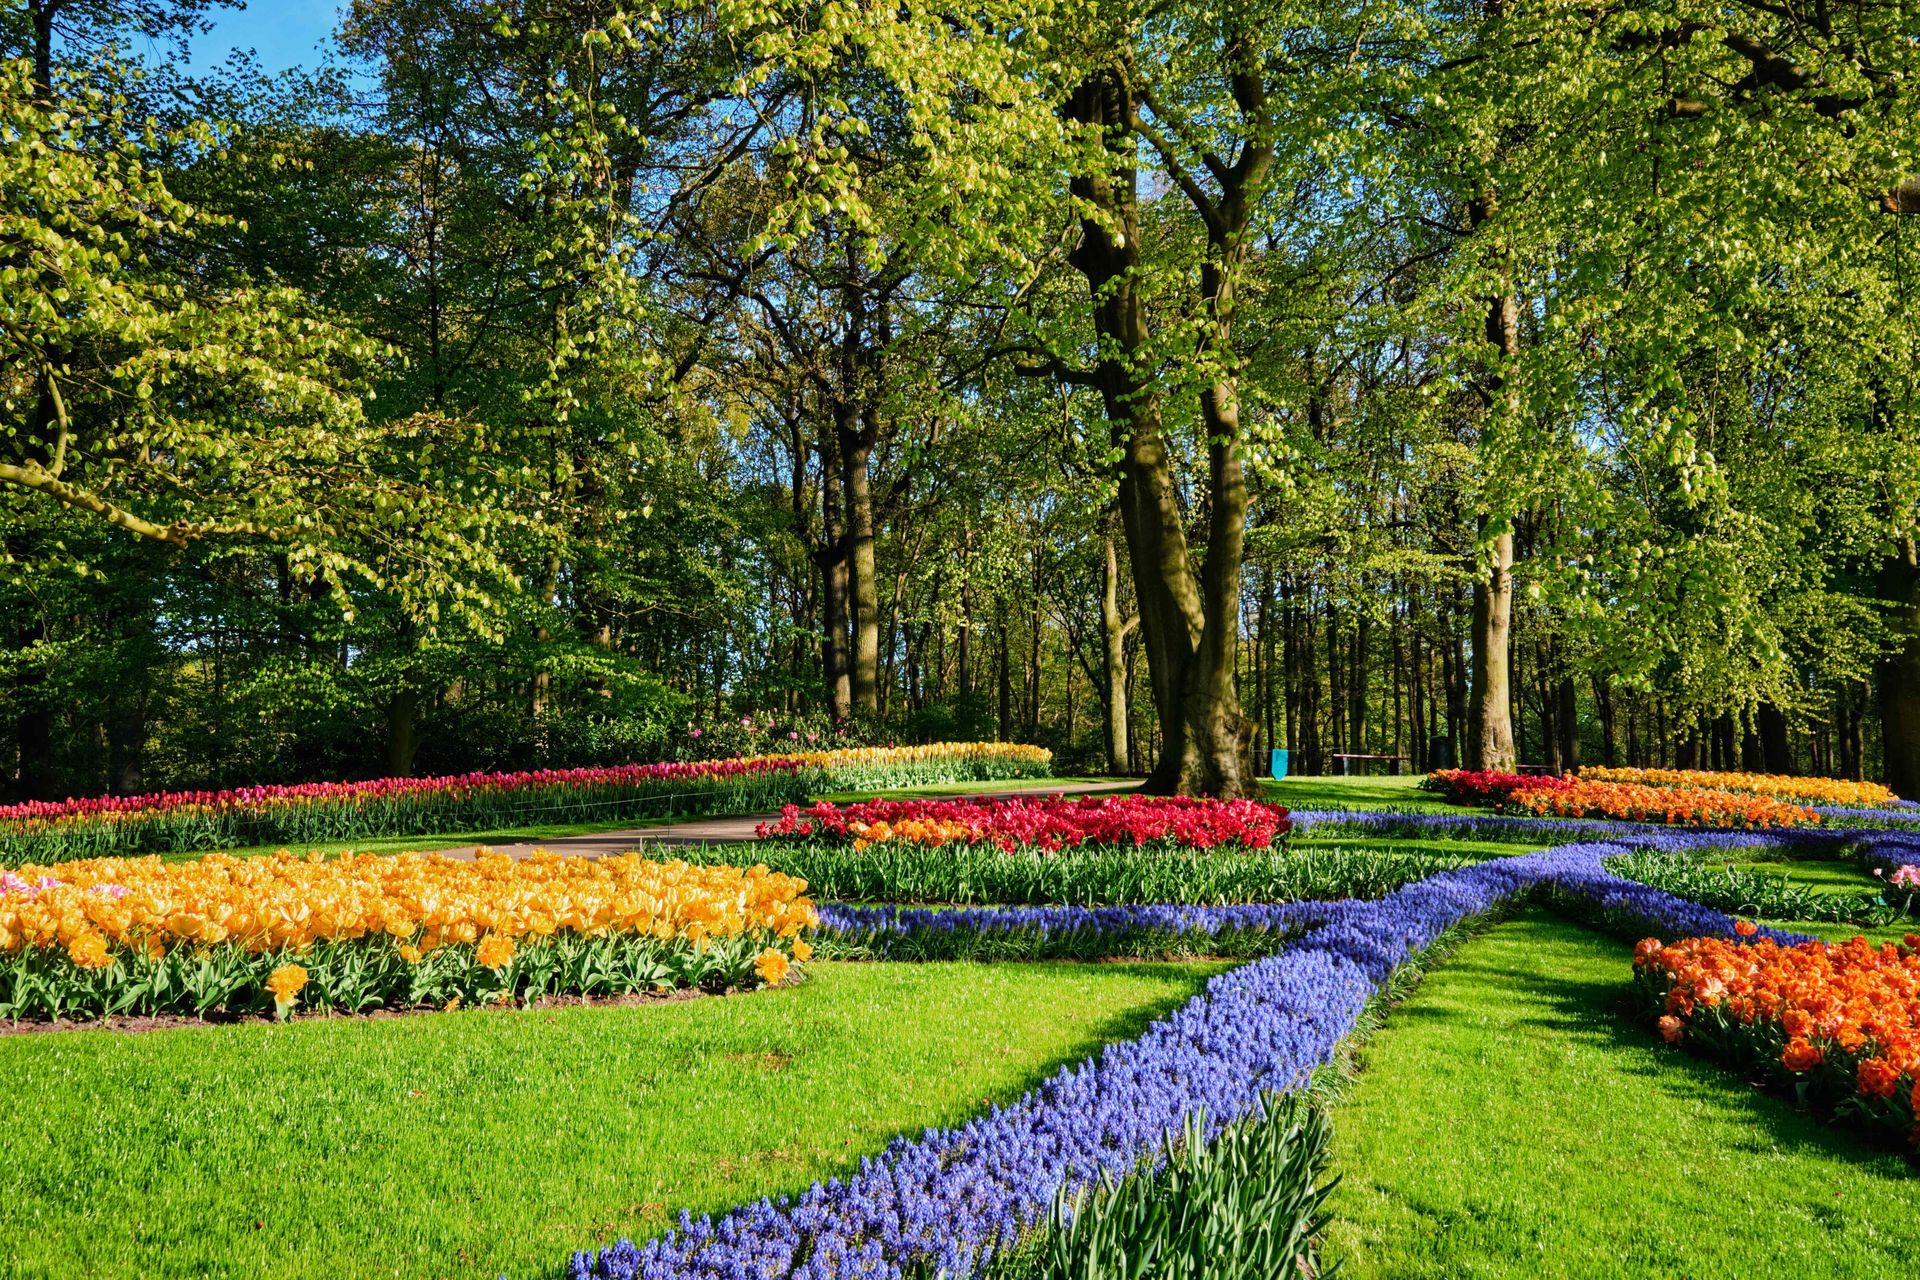 Bright flowerbed in a big yard surrounded by trees